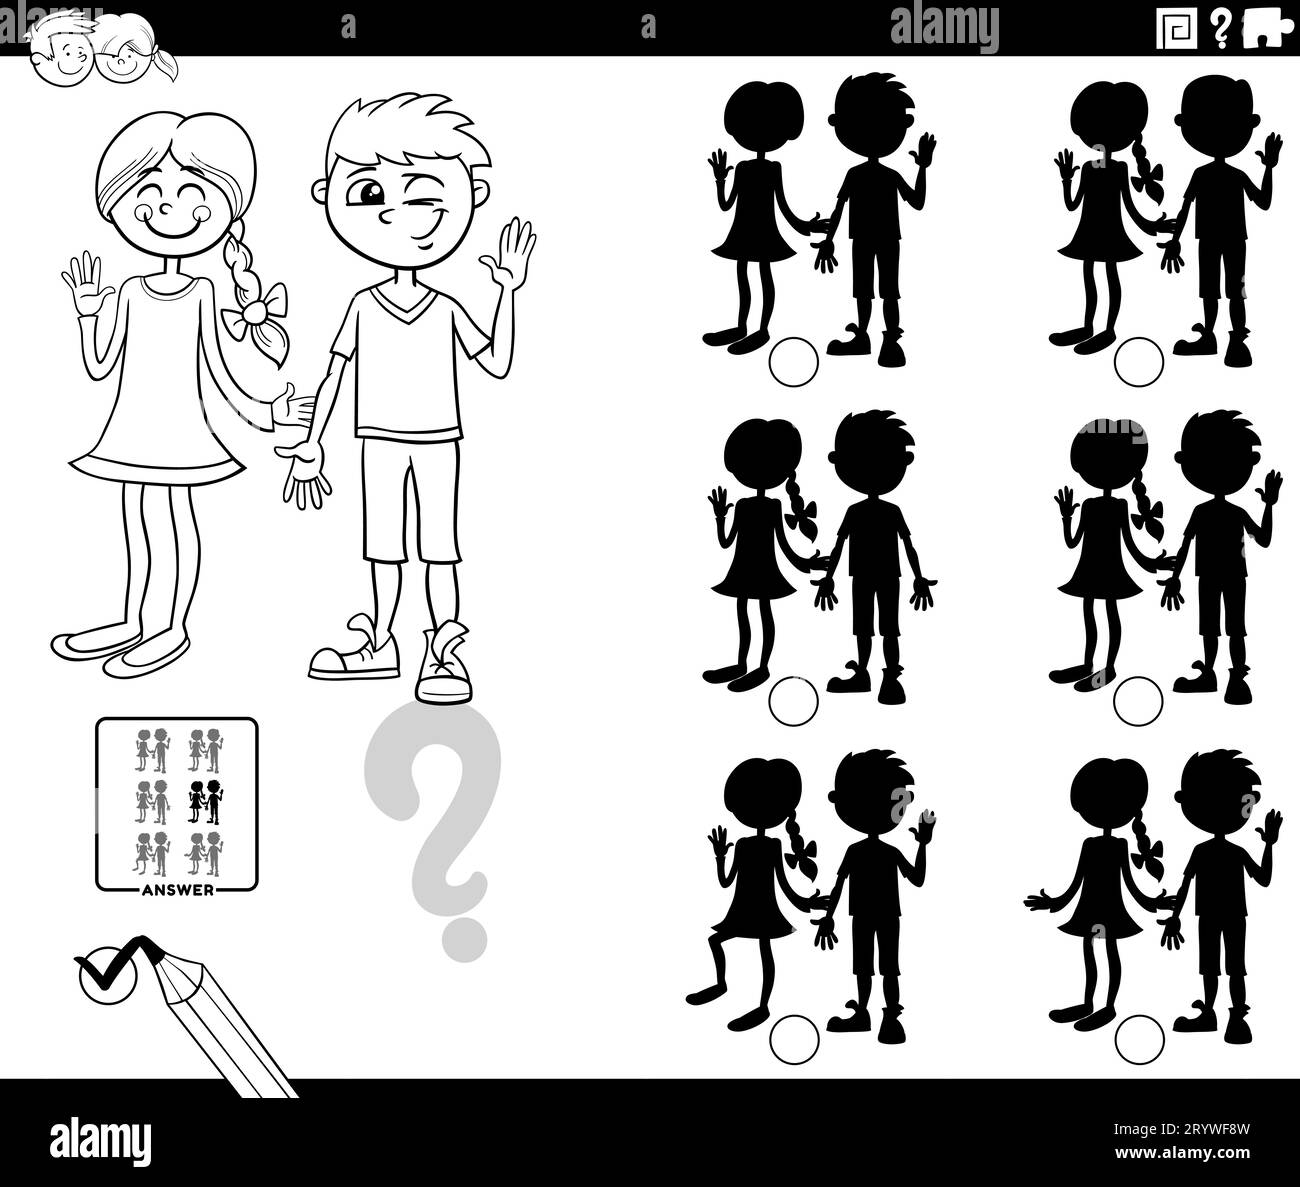 Black and white Cartoon illustration of finding the shadow without differences educational game with girl and boy characters coloring page Stock Photo